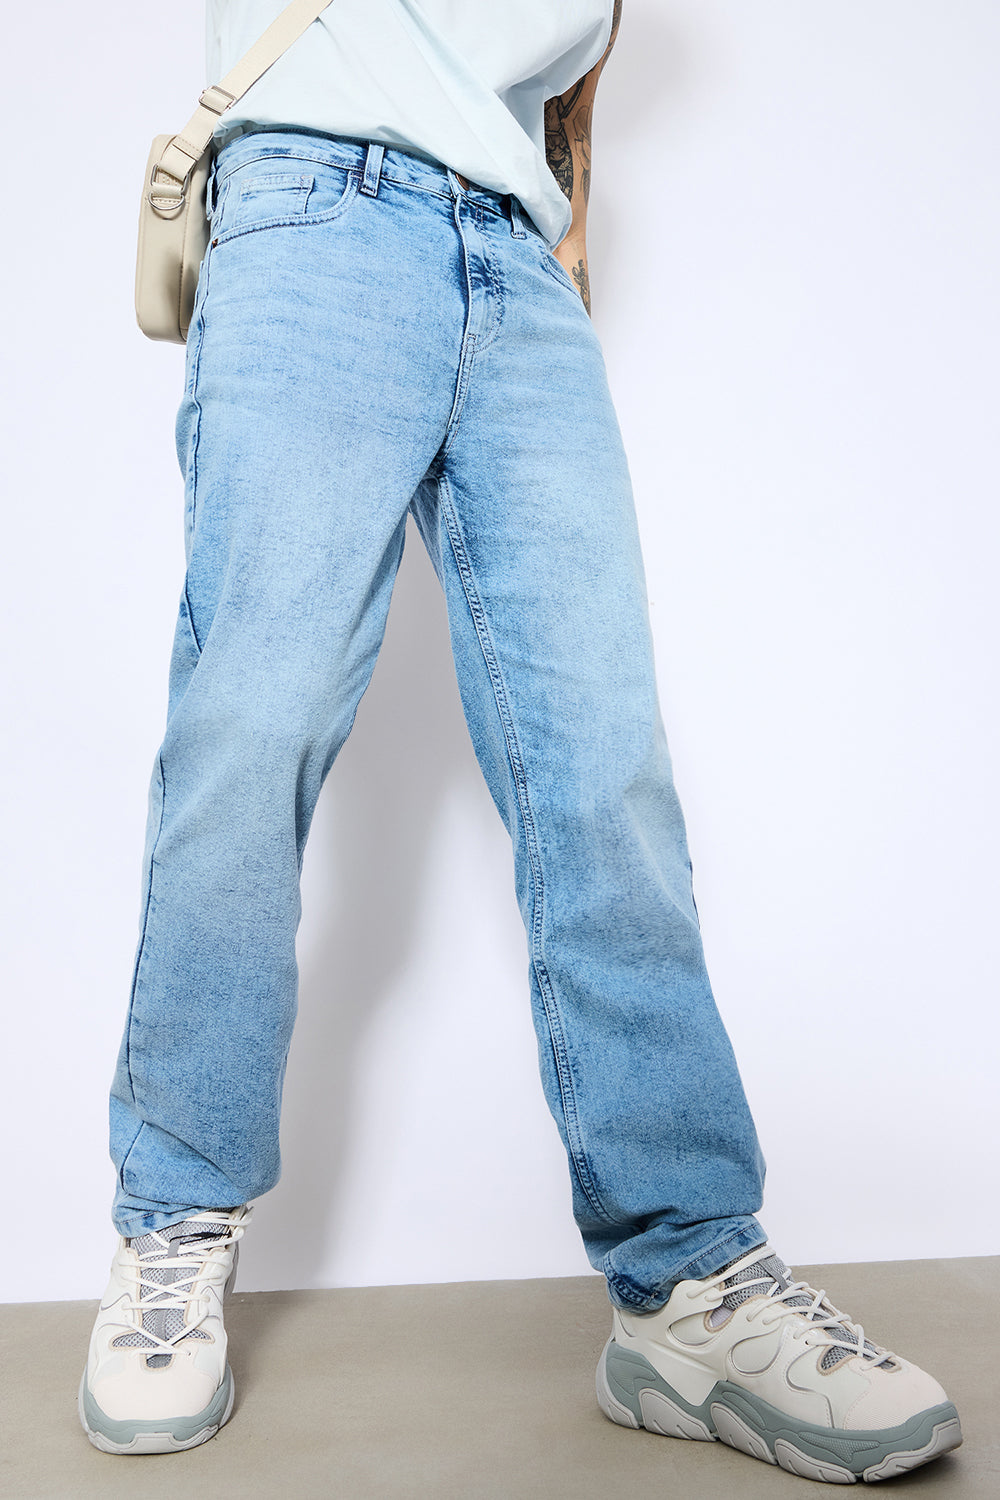 MEN'S ICE BLUE STRAIGHT FIT JEANS